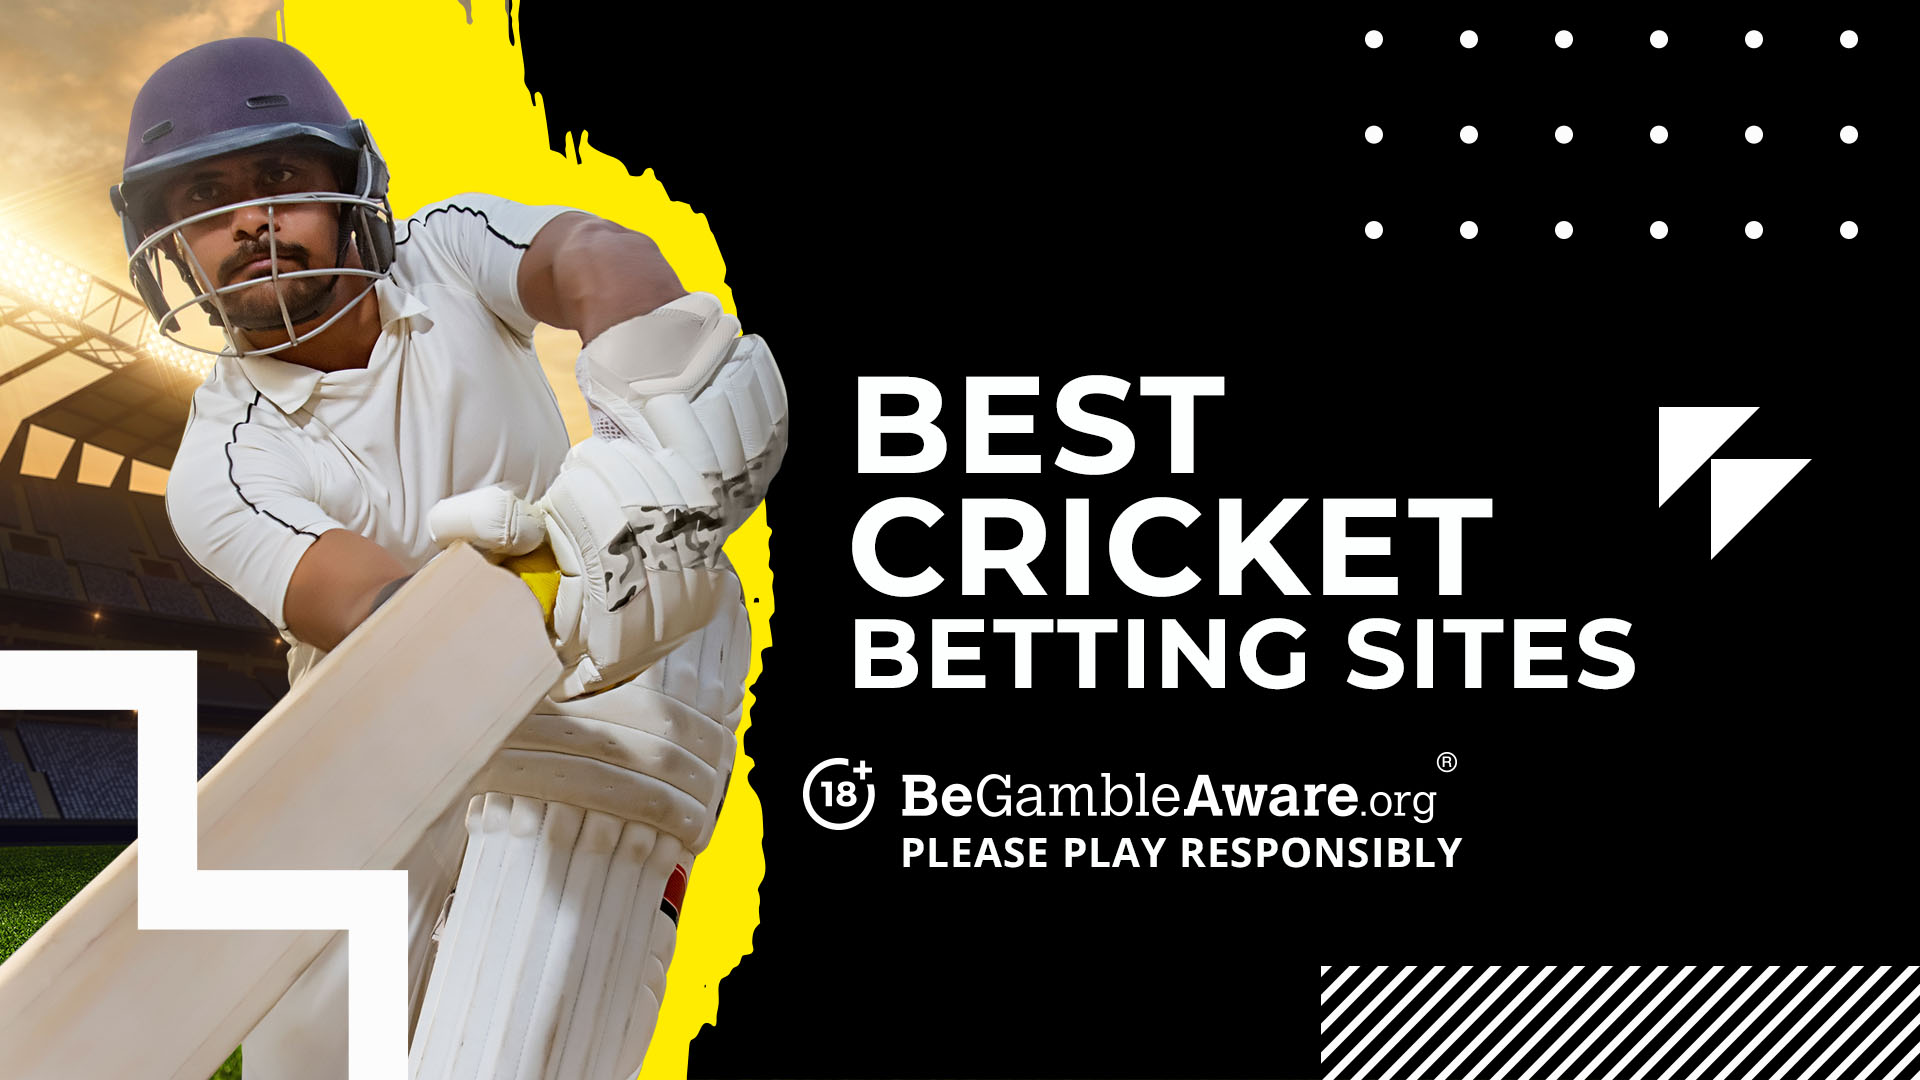 Some Must-Know Tips for Selecting the Best Cricket Betting Platforms